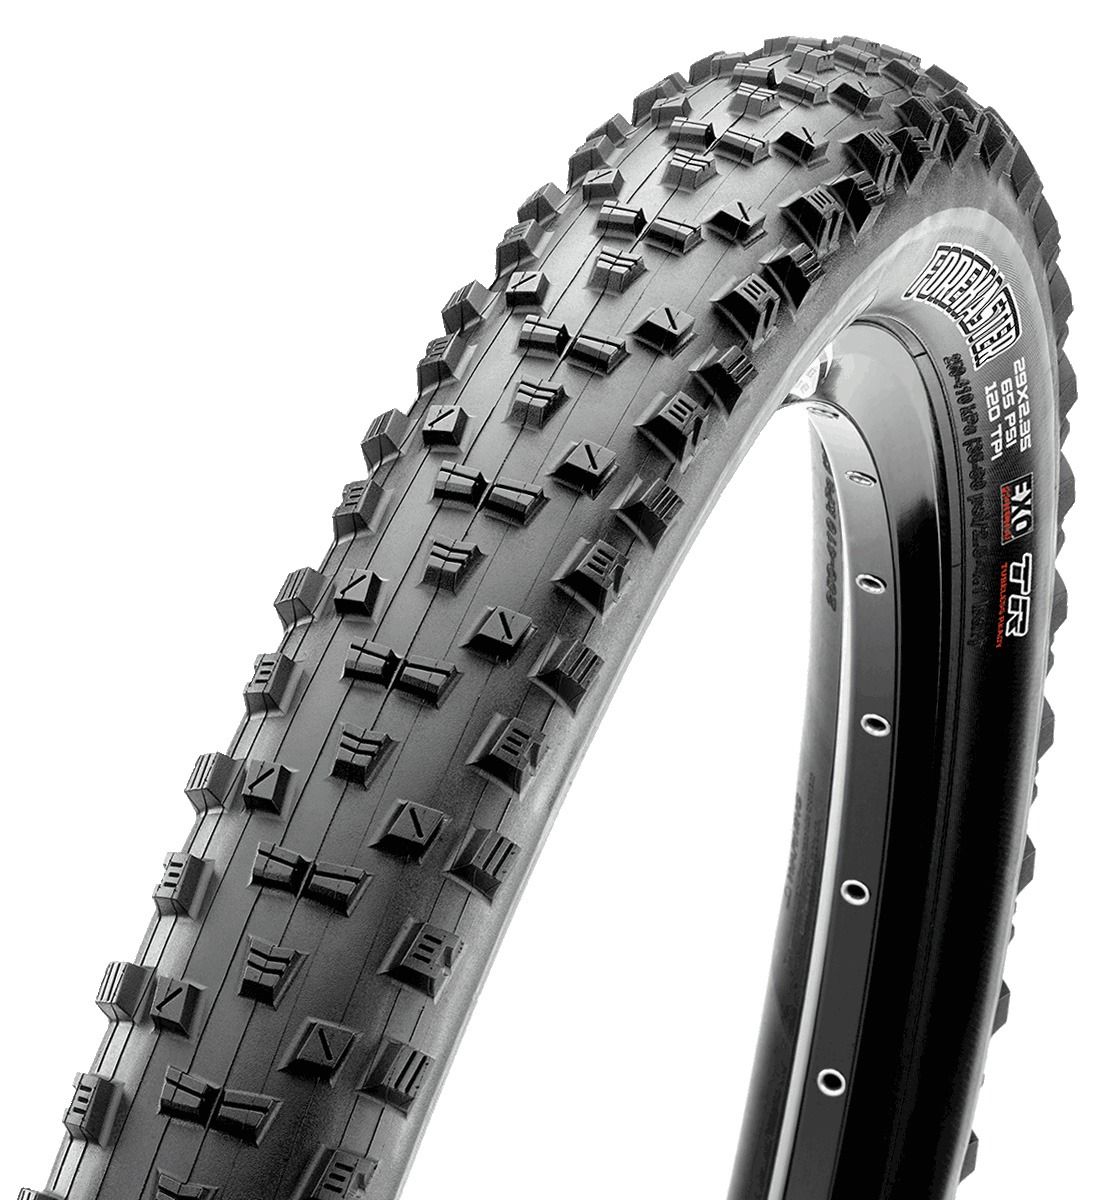 maxxis forecaster 29x2.35 (2шт)